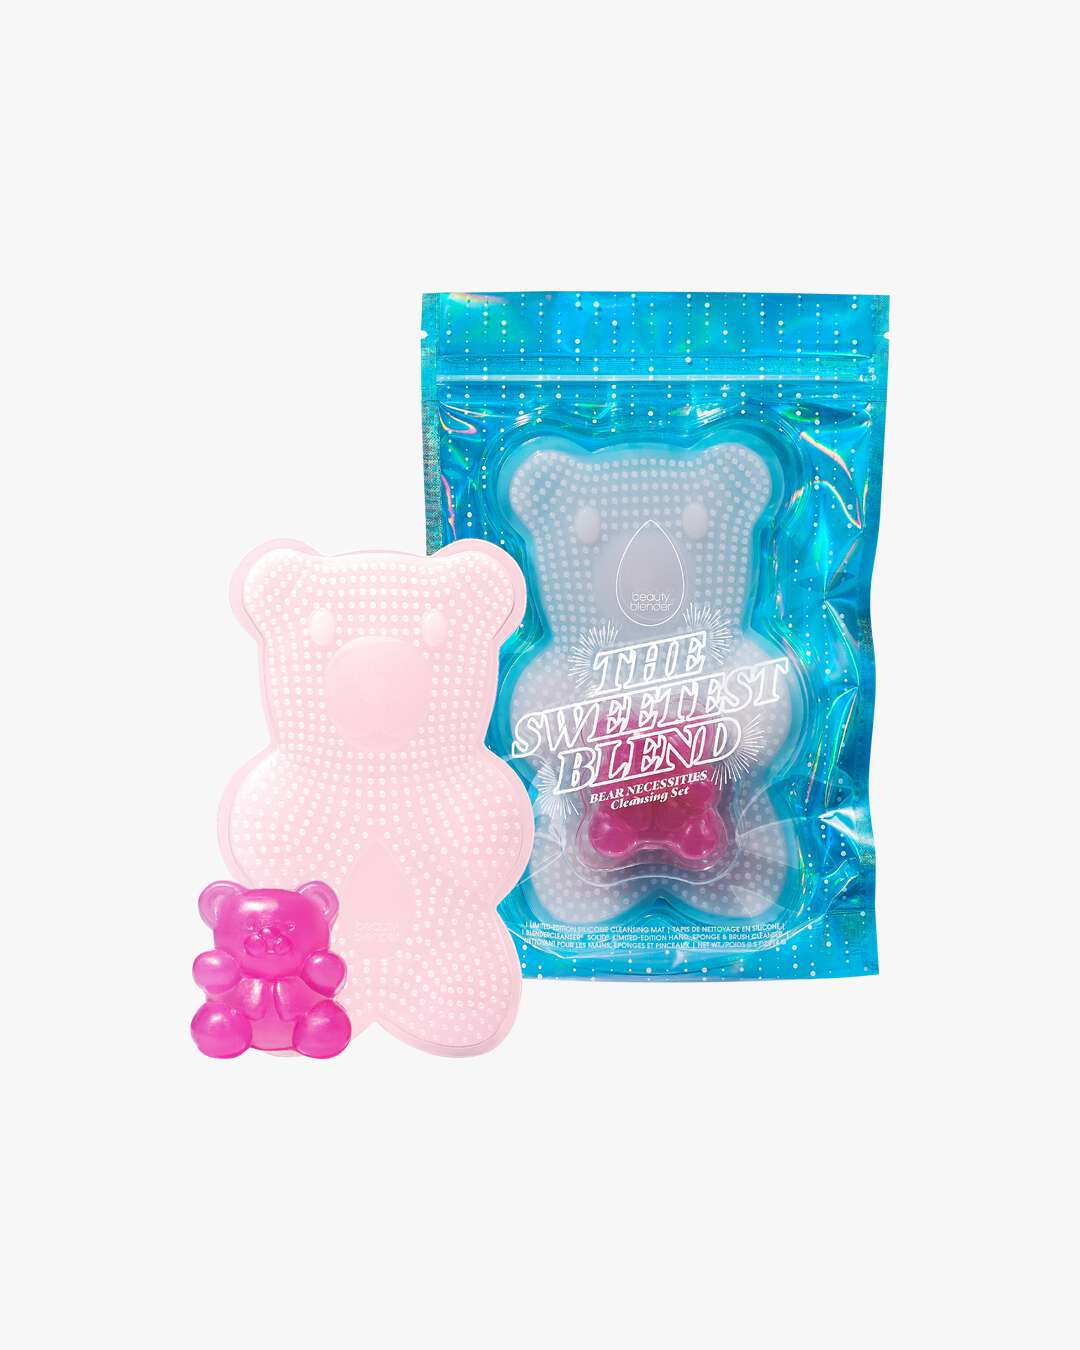 The Sweetest Blend Bear Necessities Cleansing Set